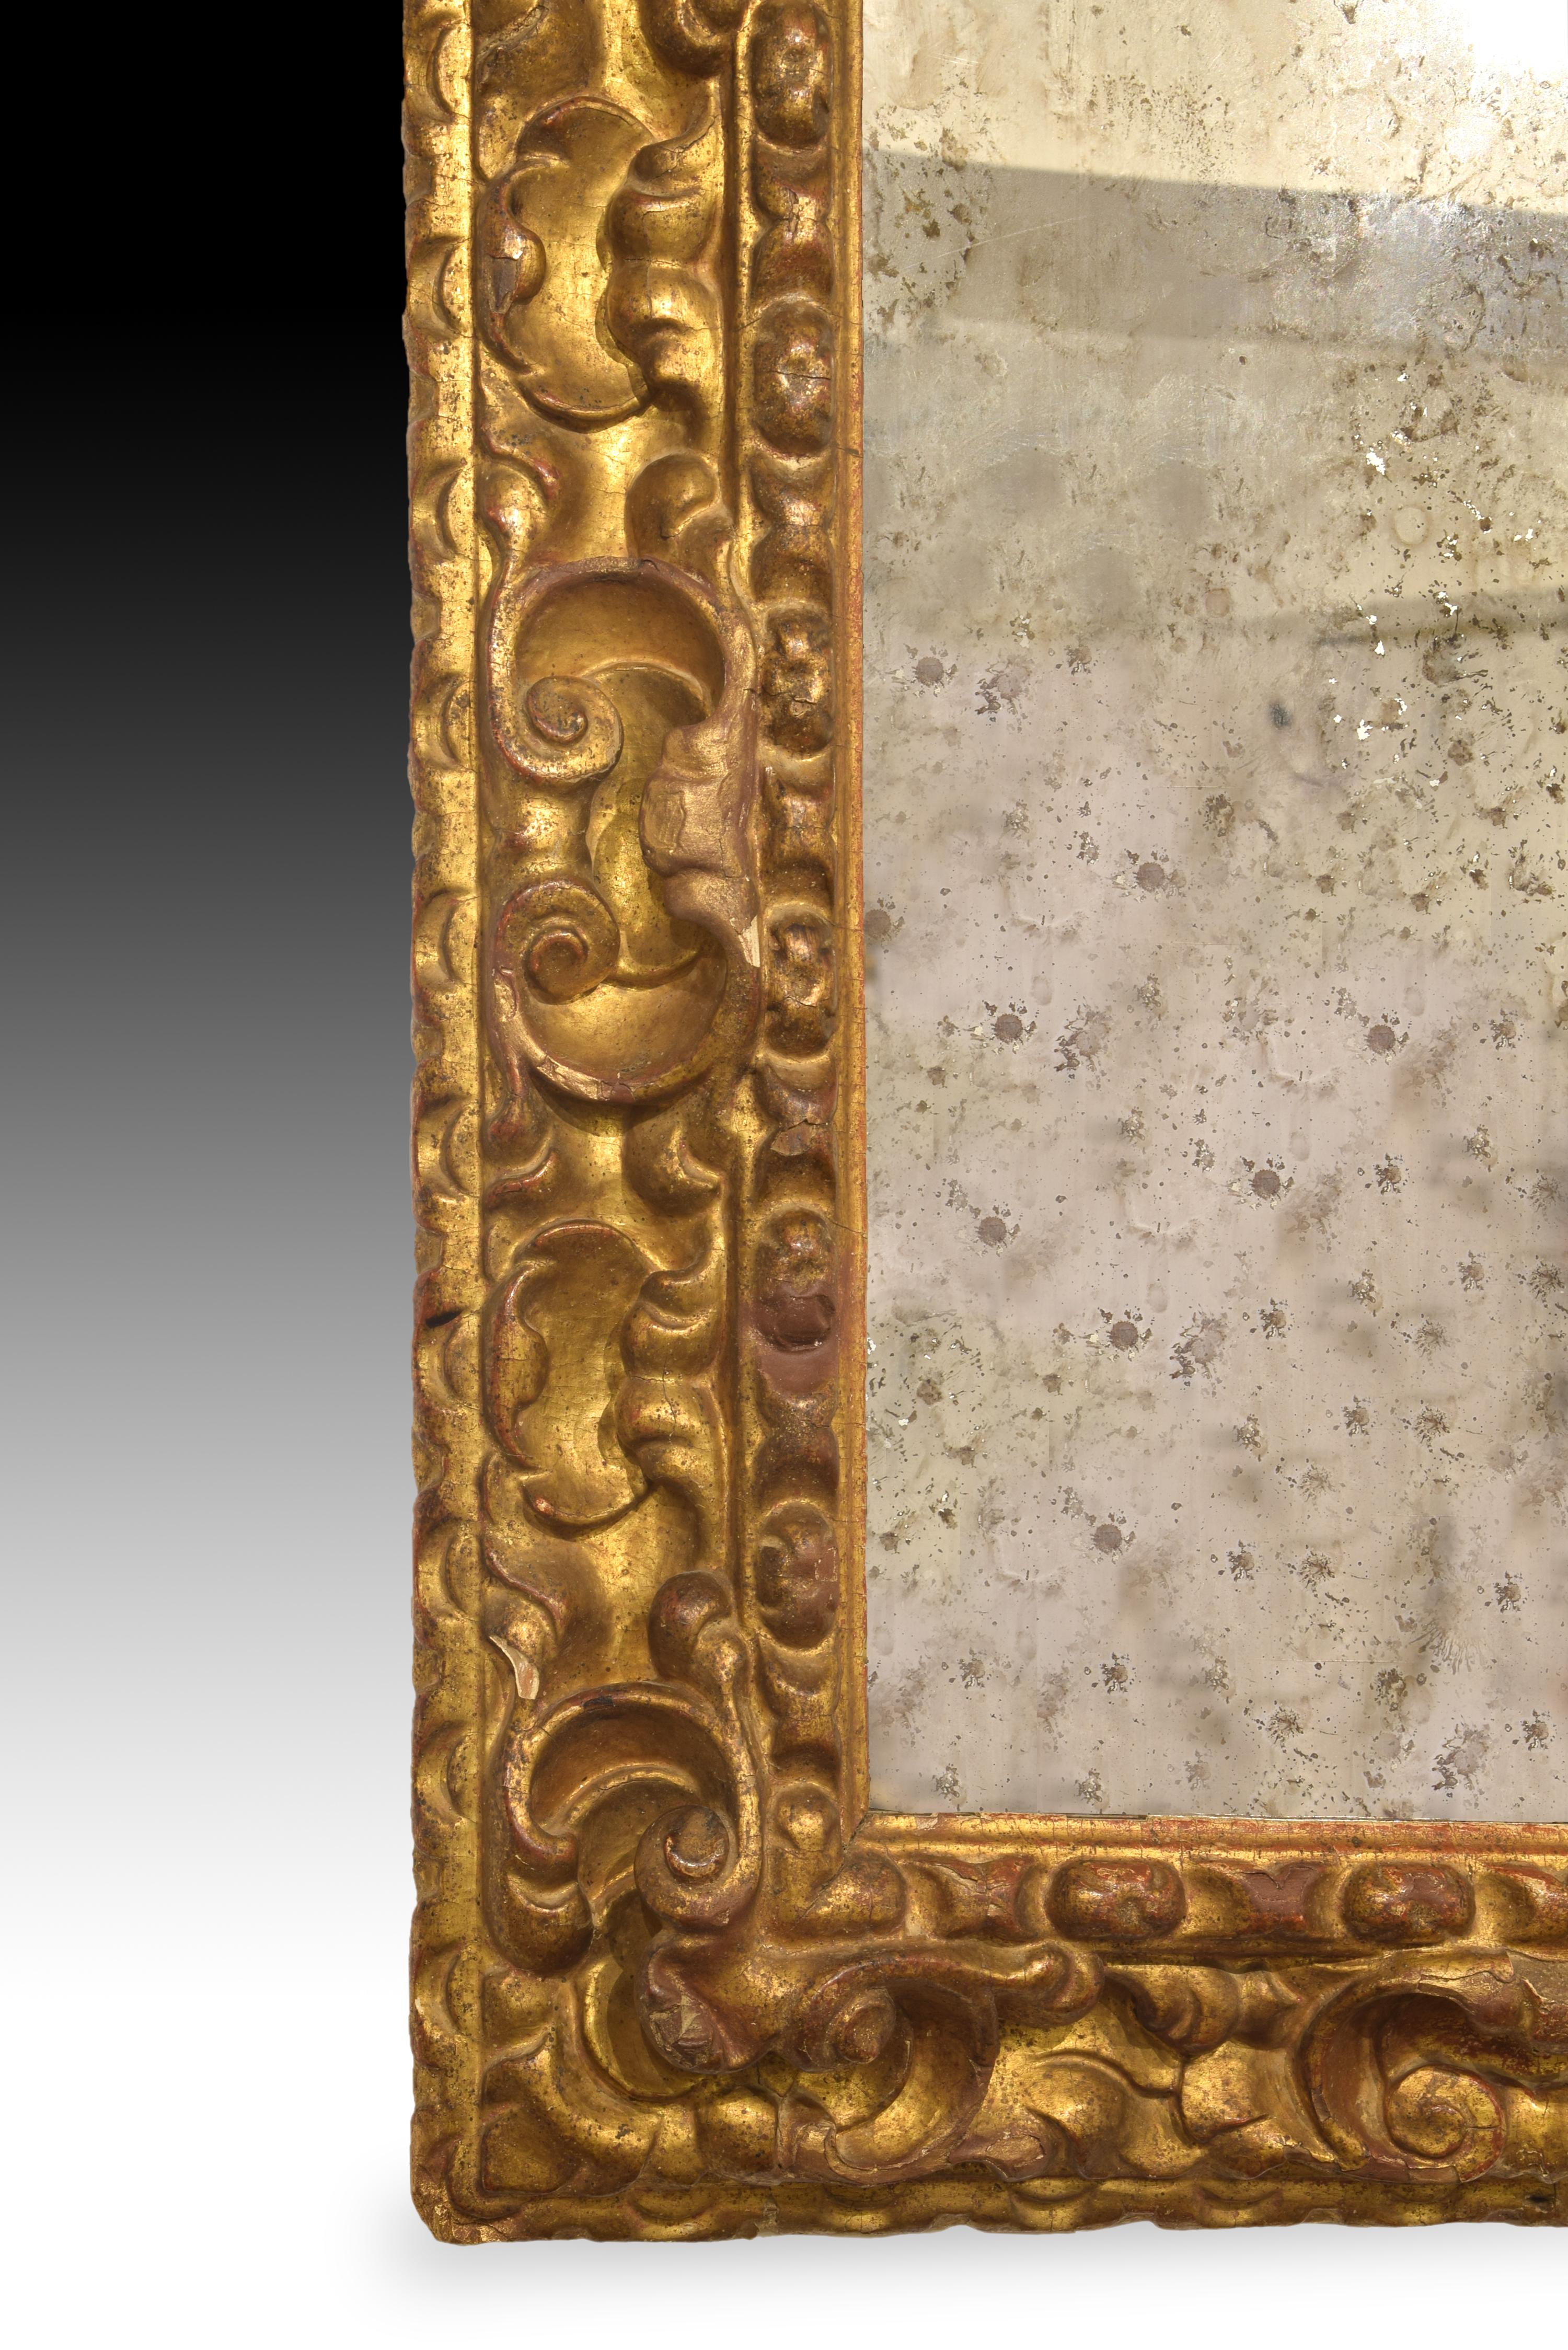 Rectangular mirror with carved and gilded wooden frame which presents some sizes distributed in bands. A slightly wavy outer edge already advances the predominance of the curves of the piece; to the center a wider area worked with scrolls 